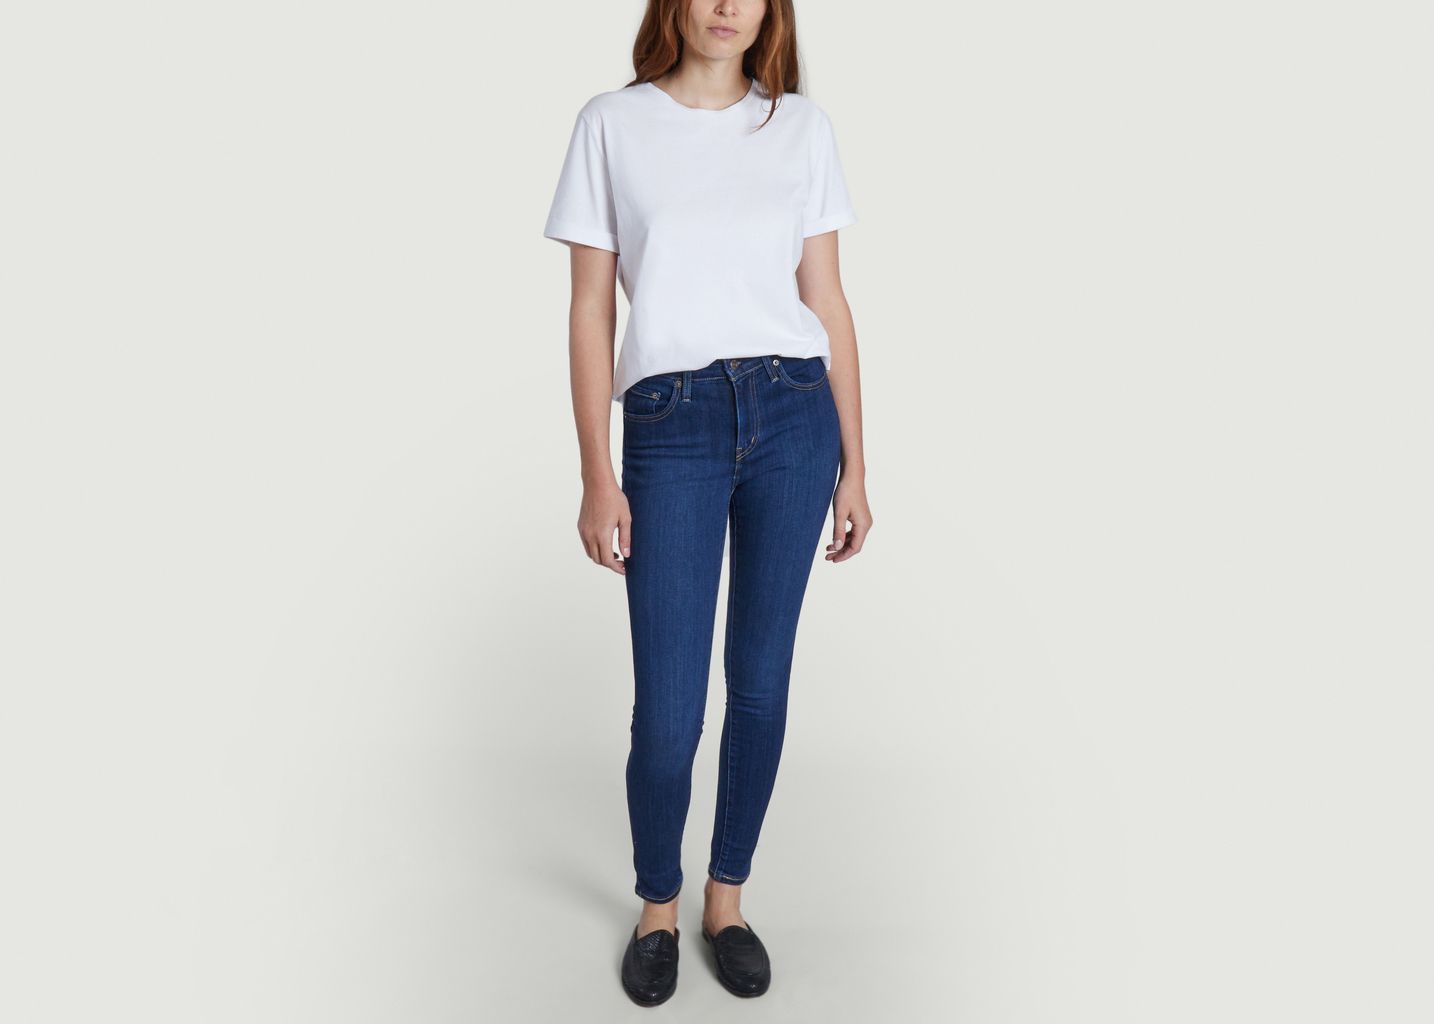 Jeans Levis 721 skinny Chelsea Eve  - Levi's Red Tab